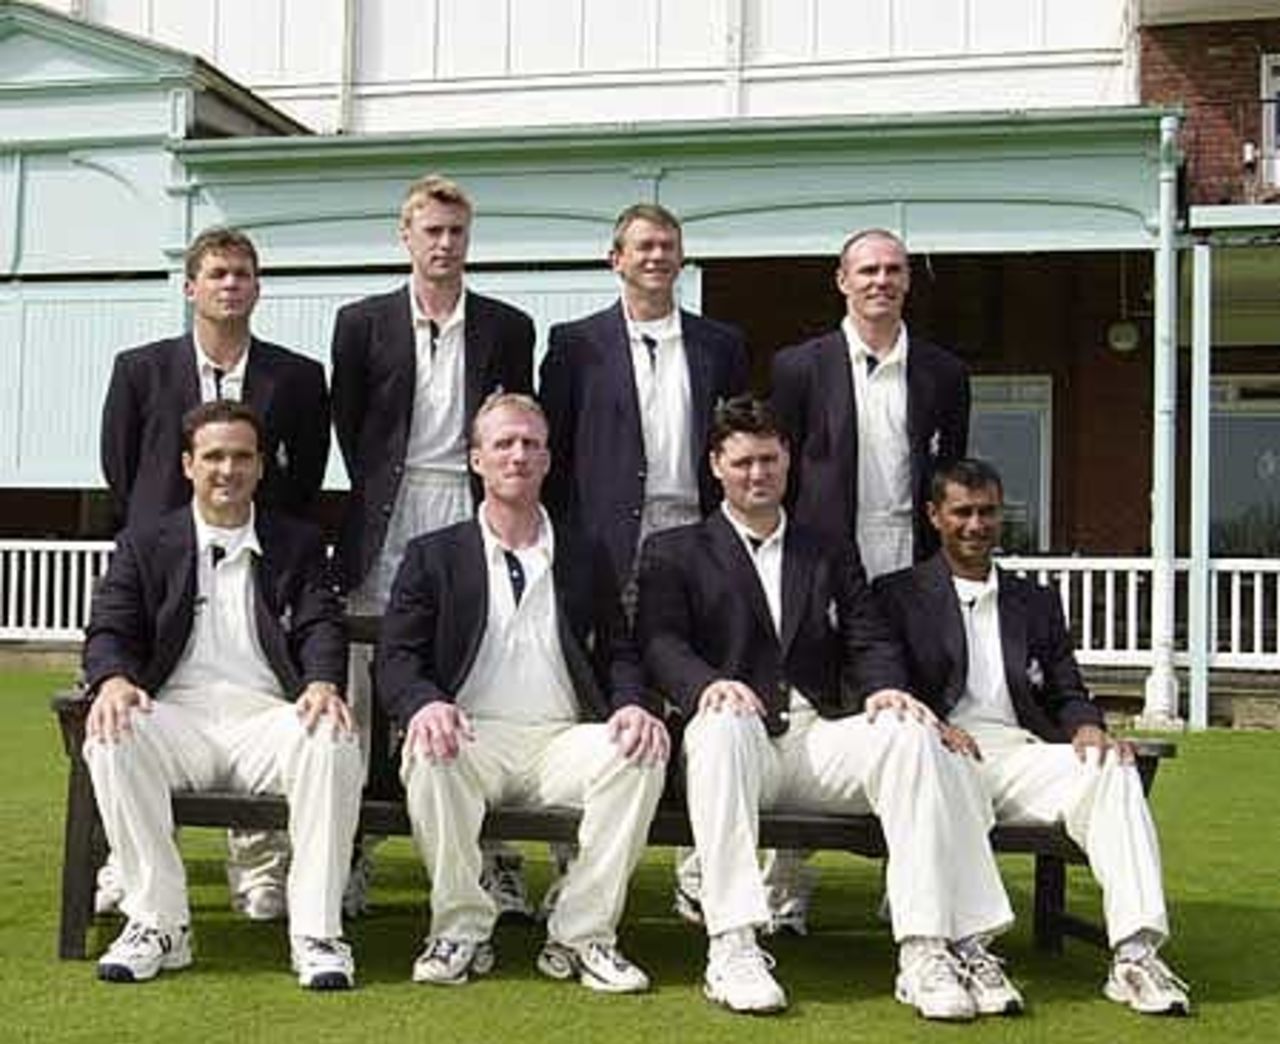 Back Row, left to right, Walker, Fulton, Wells, Nixon.  Front Row, left to right, Ealham, Fleming, McCague, Patel